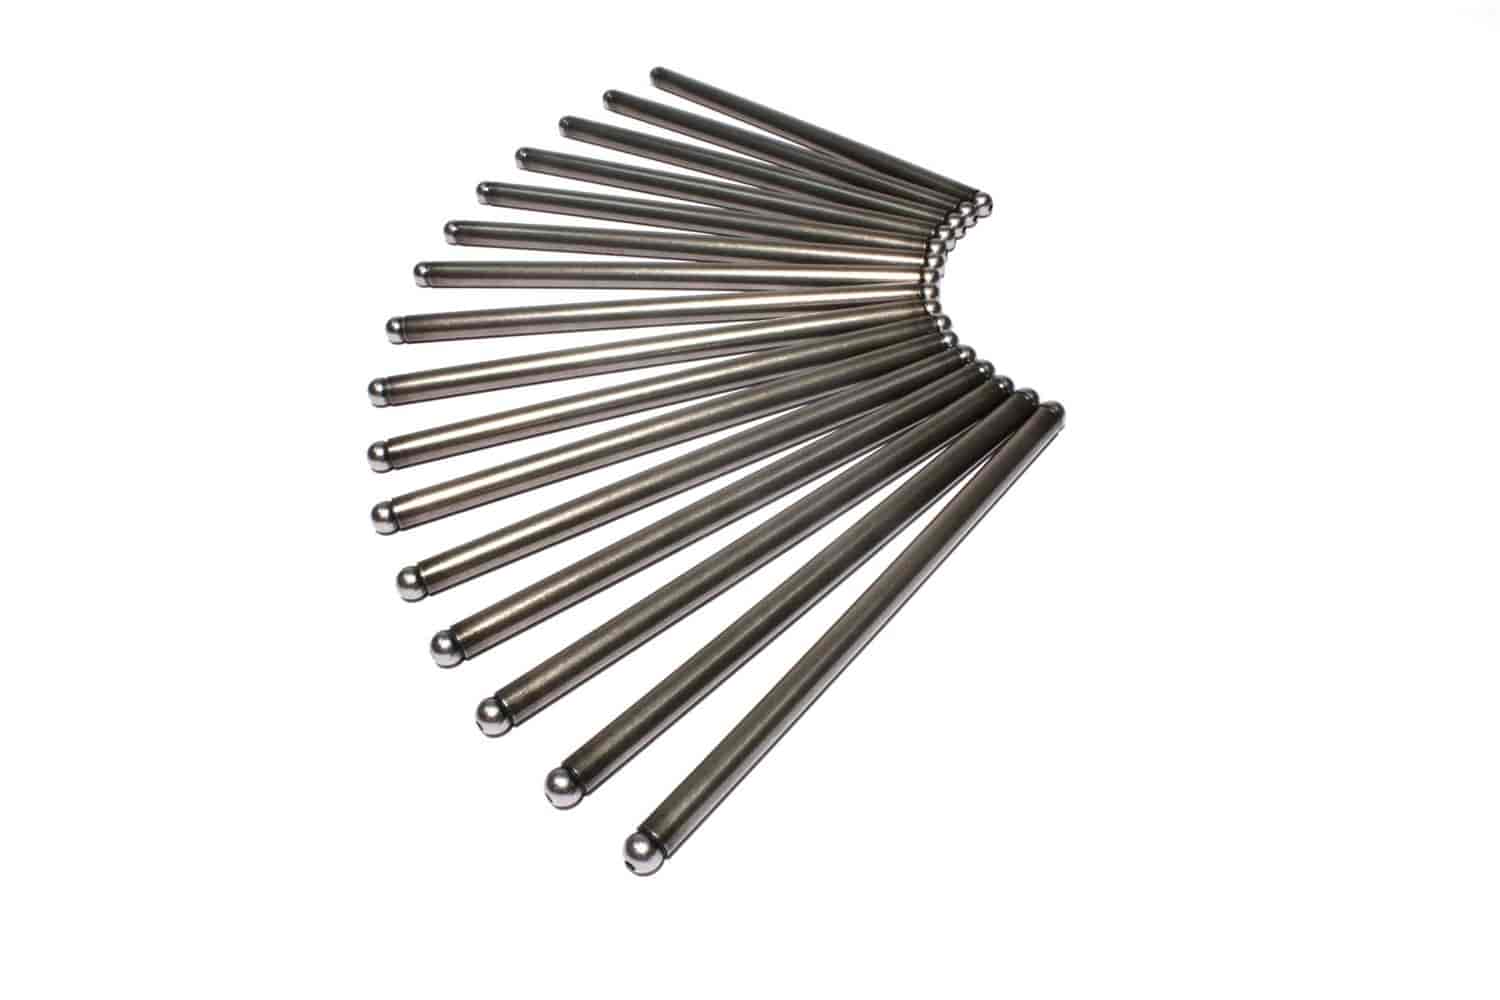 6.248 Length Competition Cams 7826-16 High Energy Pushrods for Small Block Ford 302 with OE Hydraulic Roller Cam 5/16 Diameter 